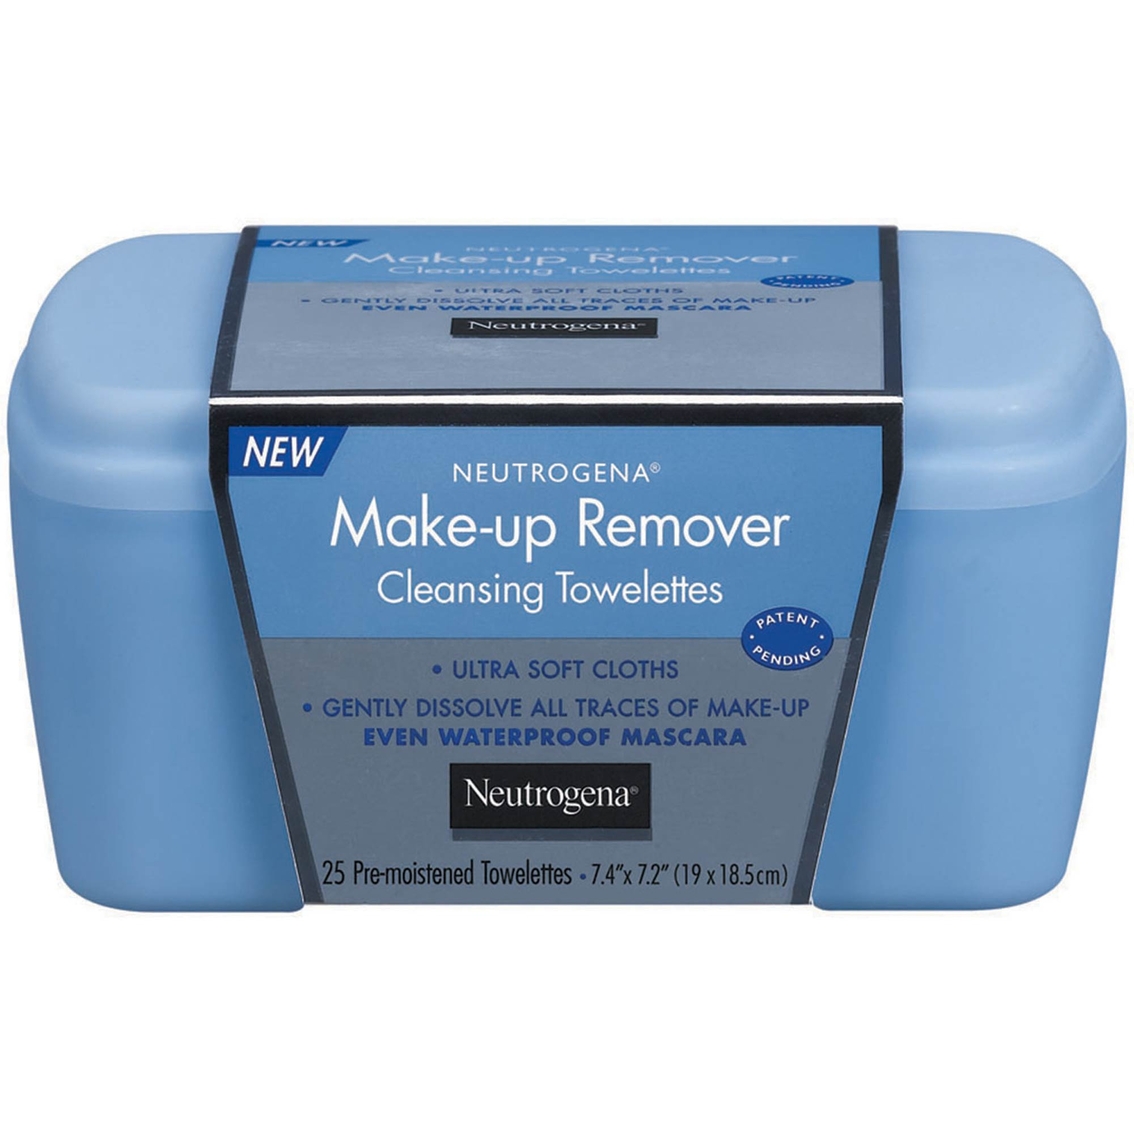 Neutrogena Makeup Remover Cleansing Towelettes 25 Pk.